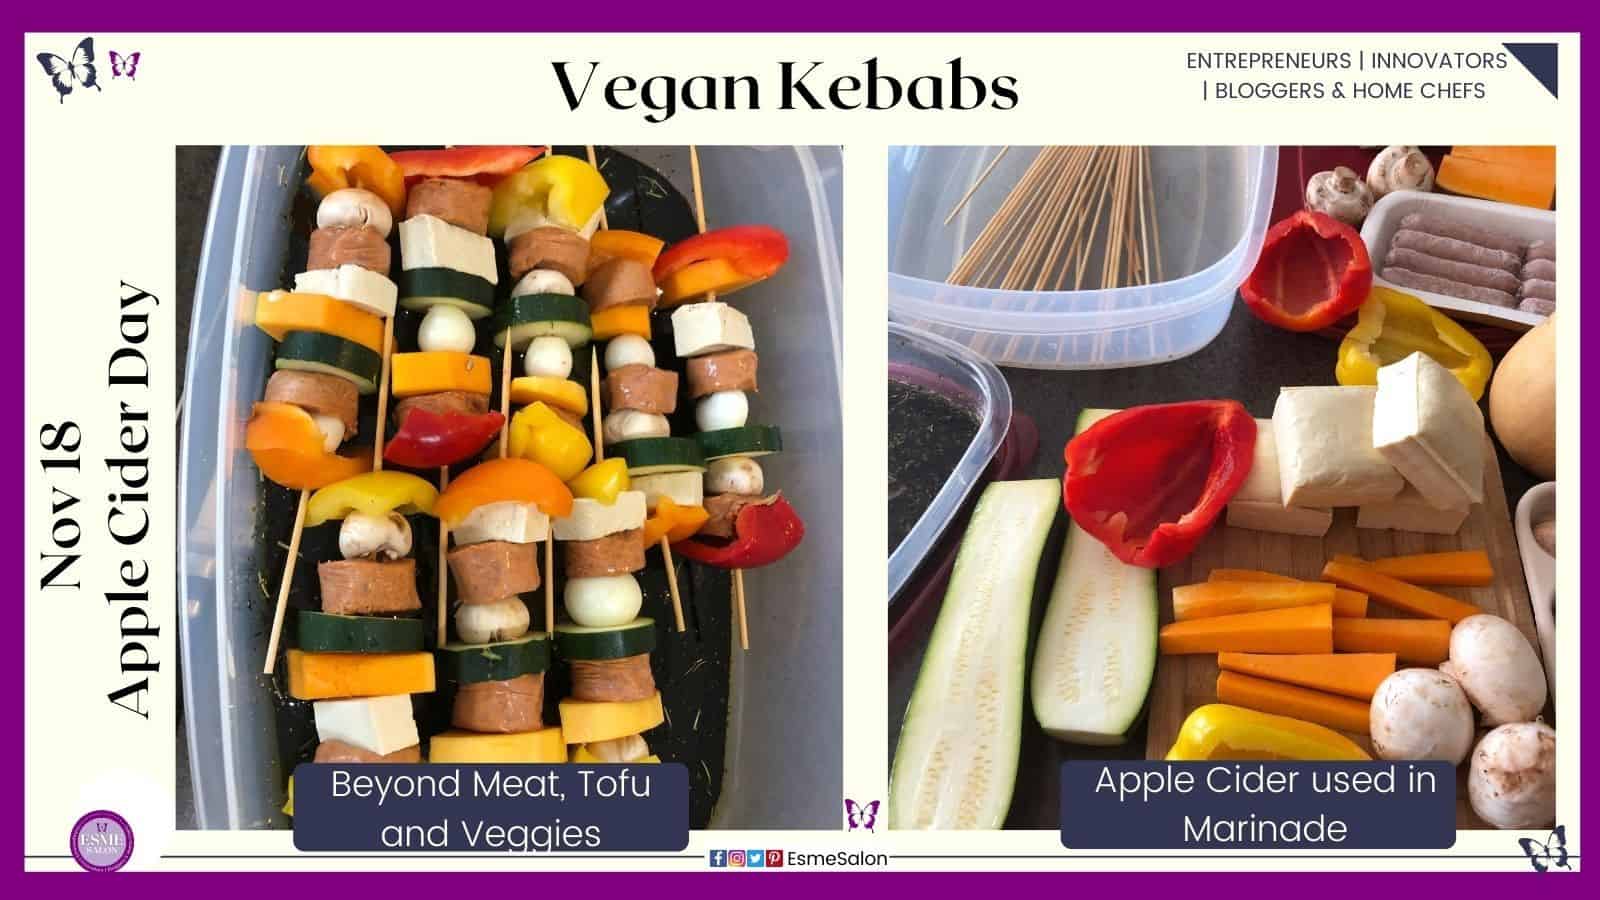 an image of Vegan Kebabs on a skewer made of veggies, tofu and beyond sausages in an Apple Cider sauce